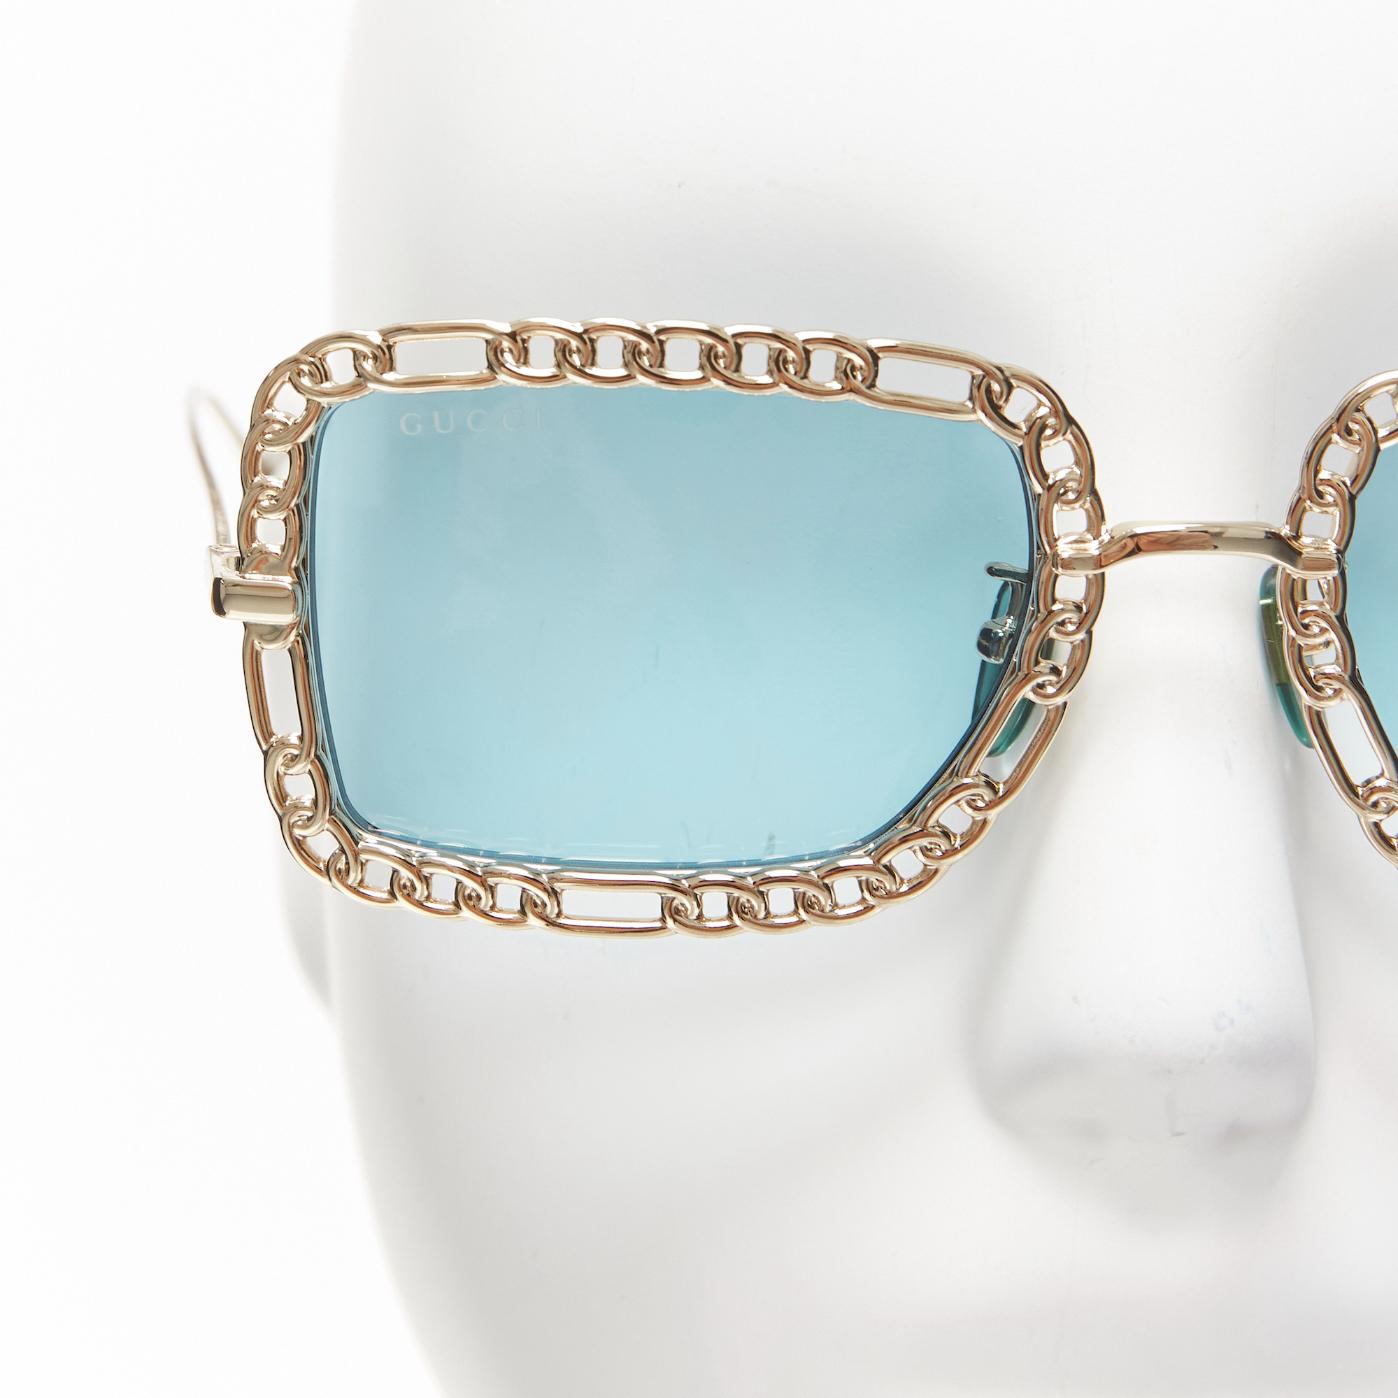 GUCCI GG1112S green hue lens logo gold chain trim retro sunglasses
Reference: TGAS/D01034
Brand: Gucci
Designer: Alessandro Michele
Model: GG1112S
Material: Metal
Color: Gold, Green
Pattern: Solid
Lining: Gold Metal
Extra Details: Chain rim